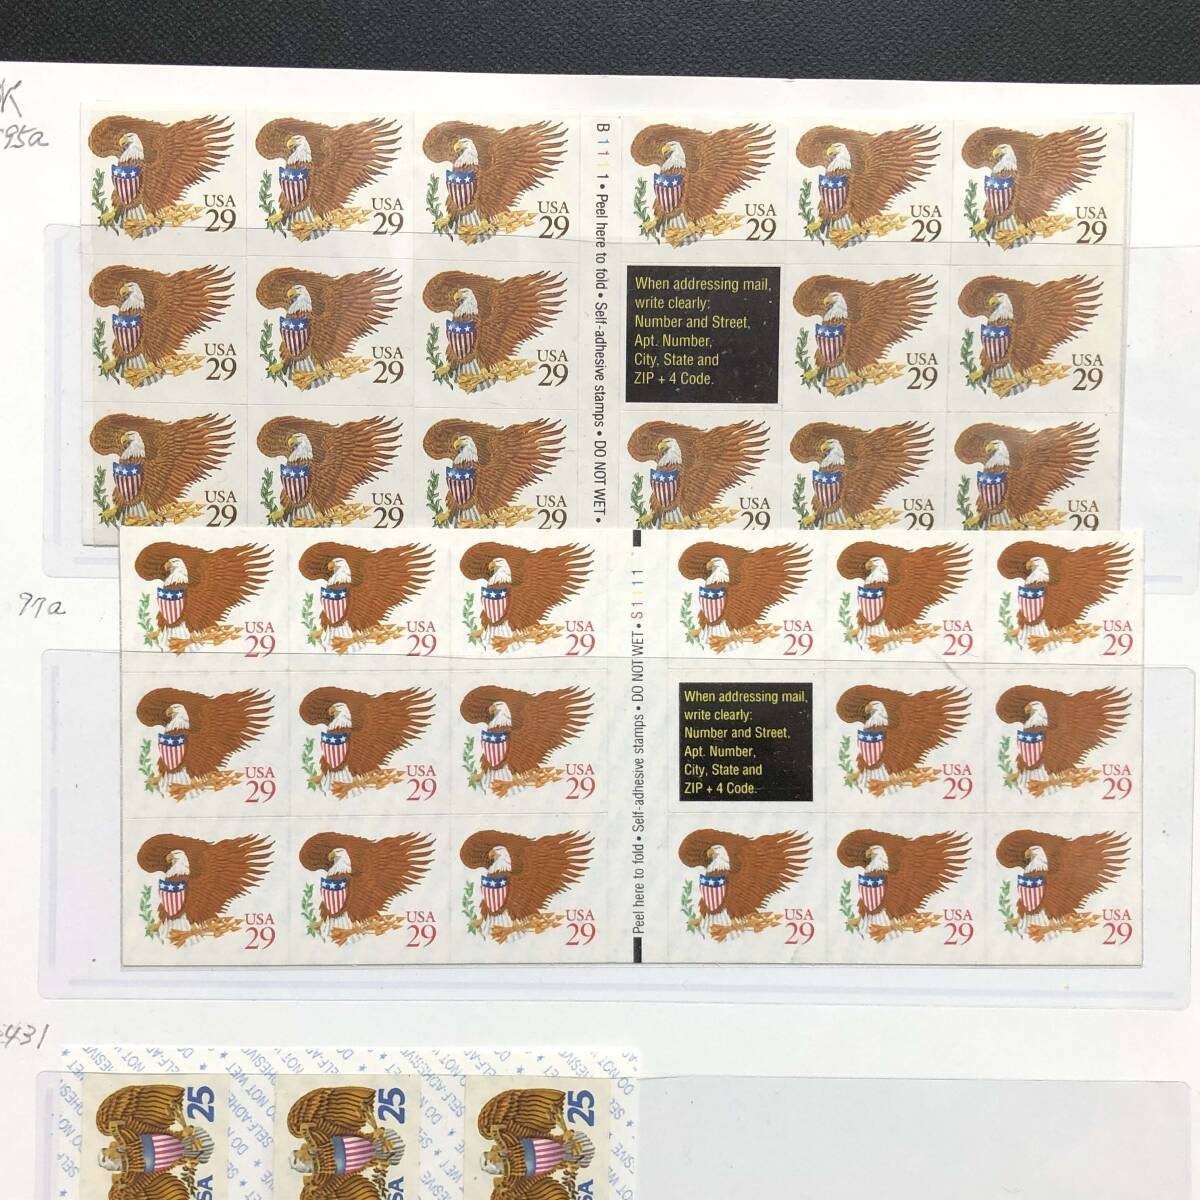 L[ foreign stamp ] America USA stamp American Eagle 25 29 collection 